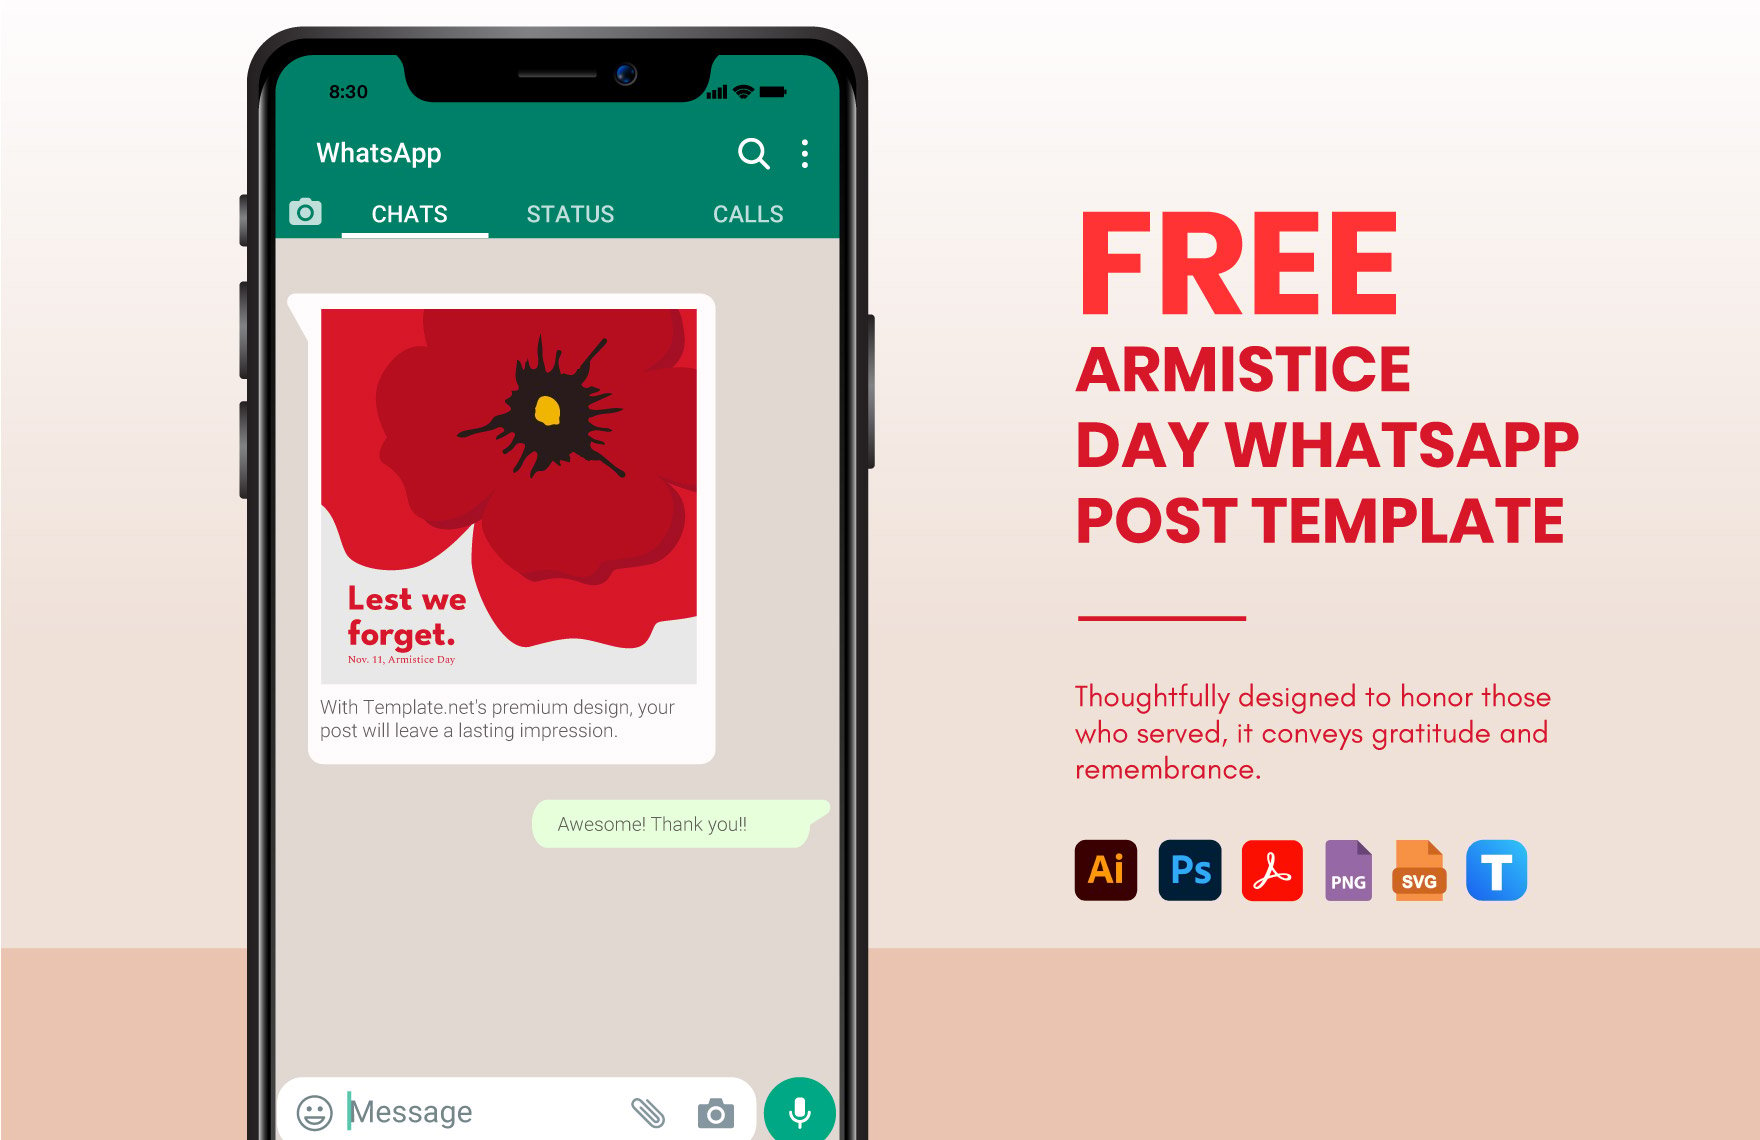 Free Armistice Day WhatsApp Post Template in PDF, Illustrator, PSD, SVG, PNG